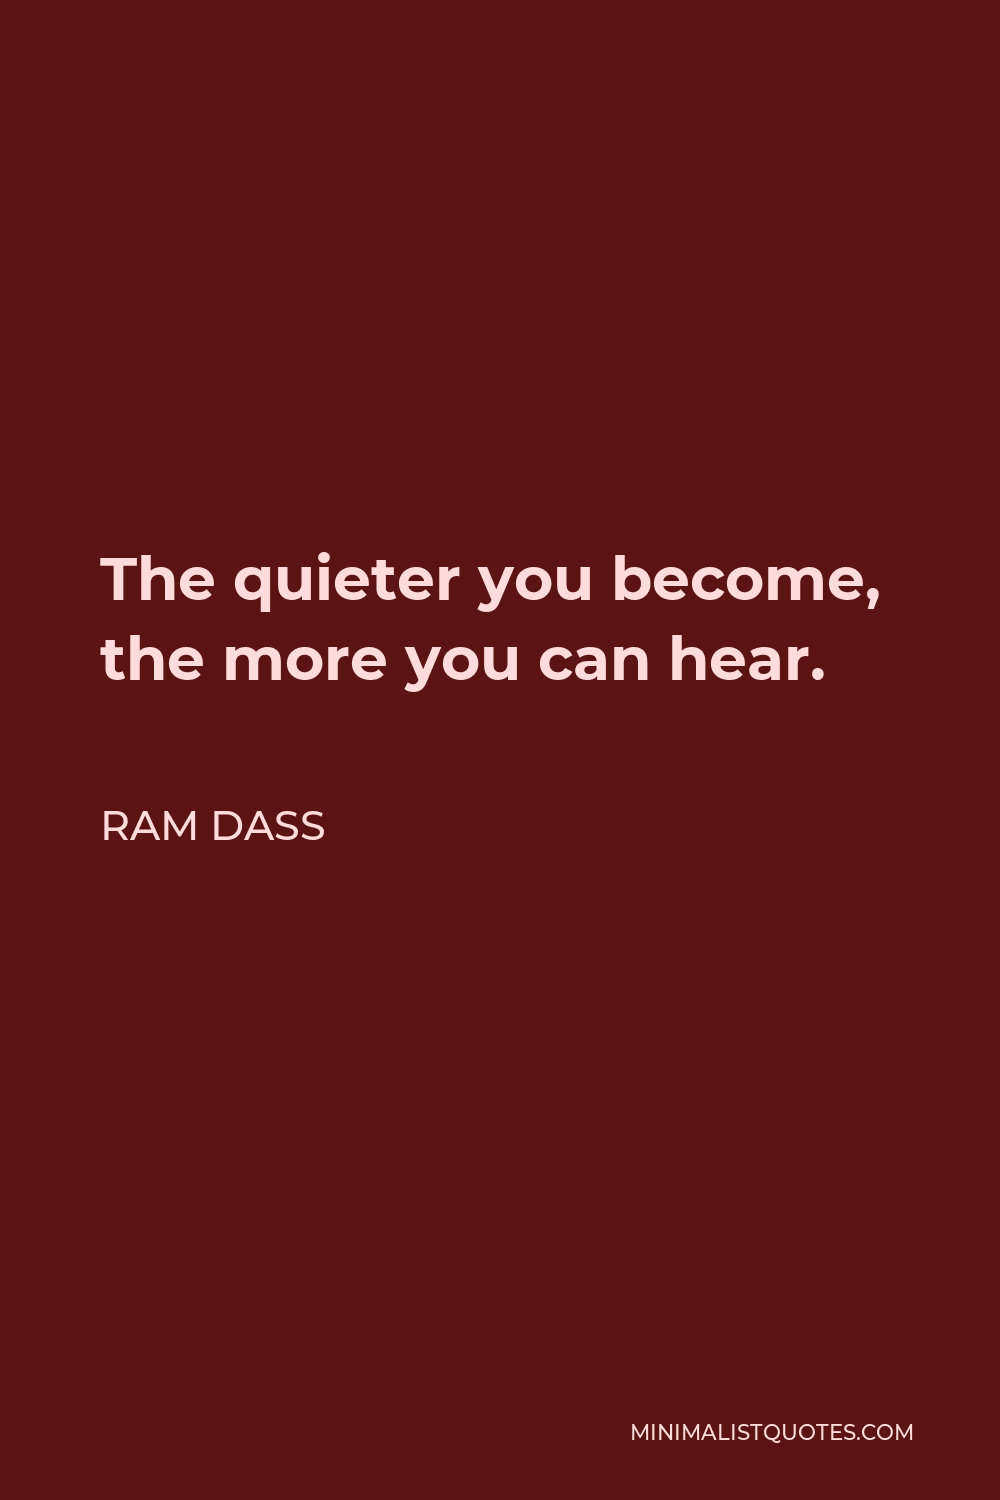 Ram Dass Quote - The quieter you become, the more you can hear.